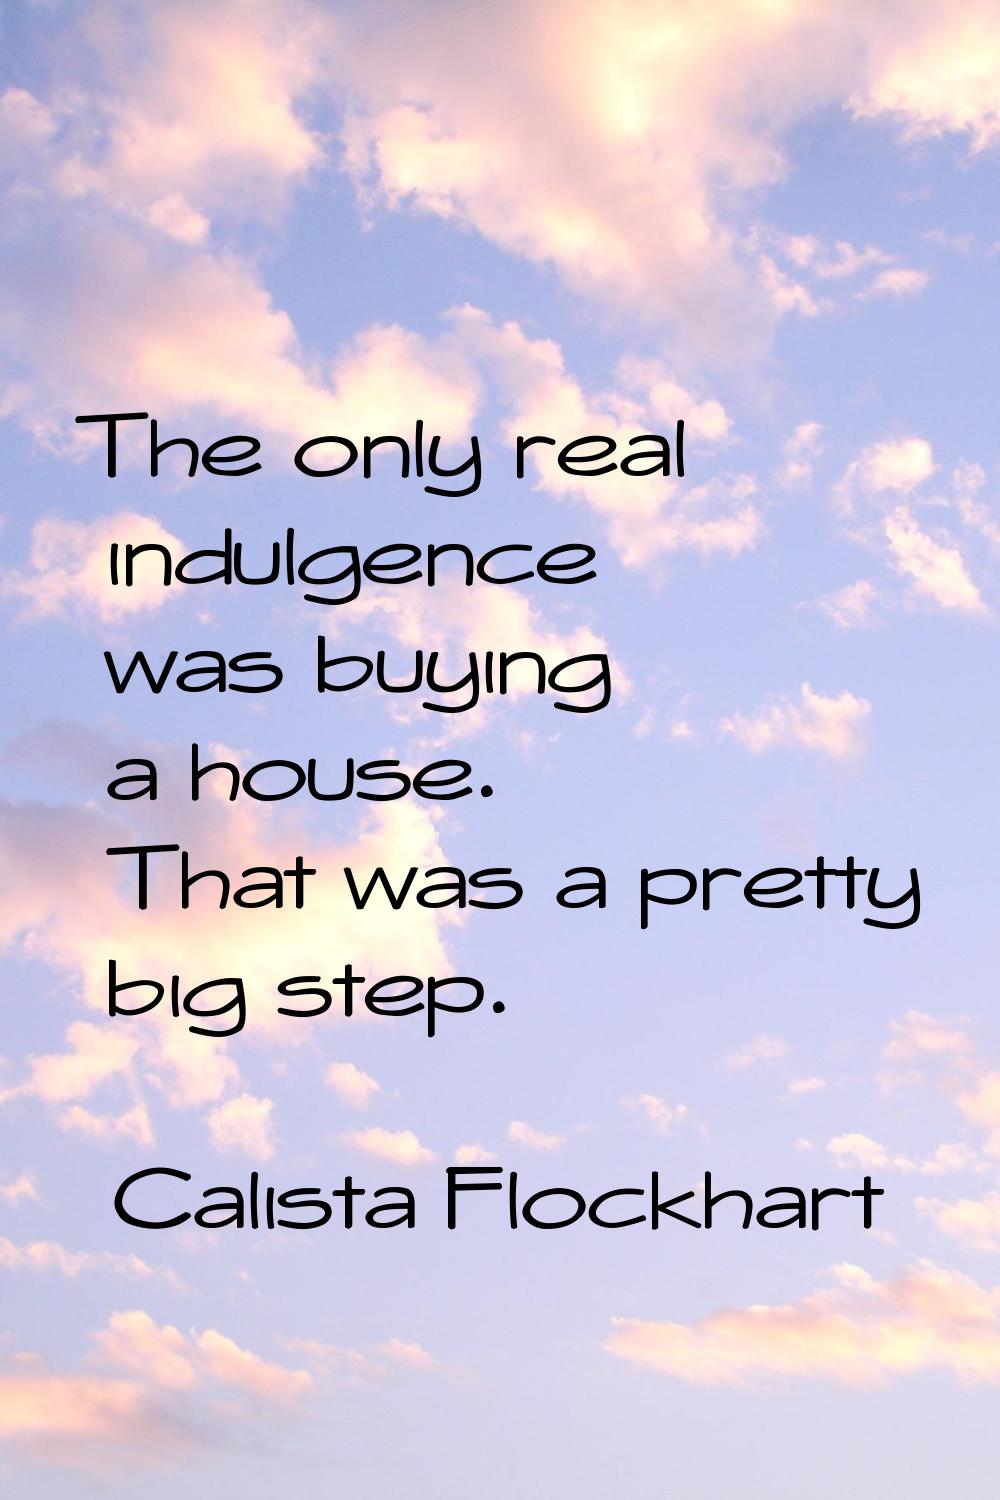 The only real indulgence was buying a house. That was a pretty big step.